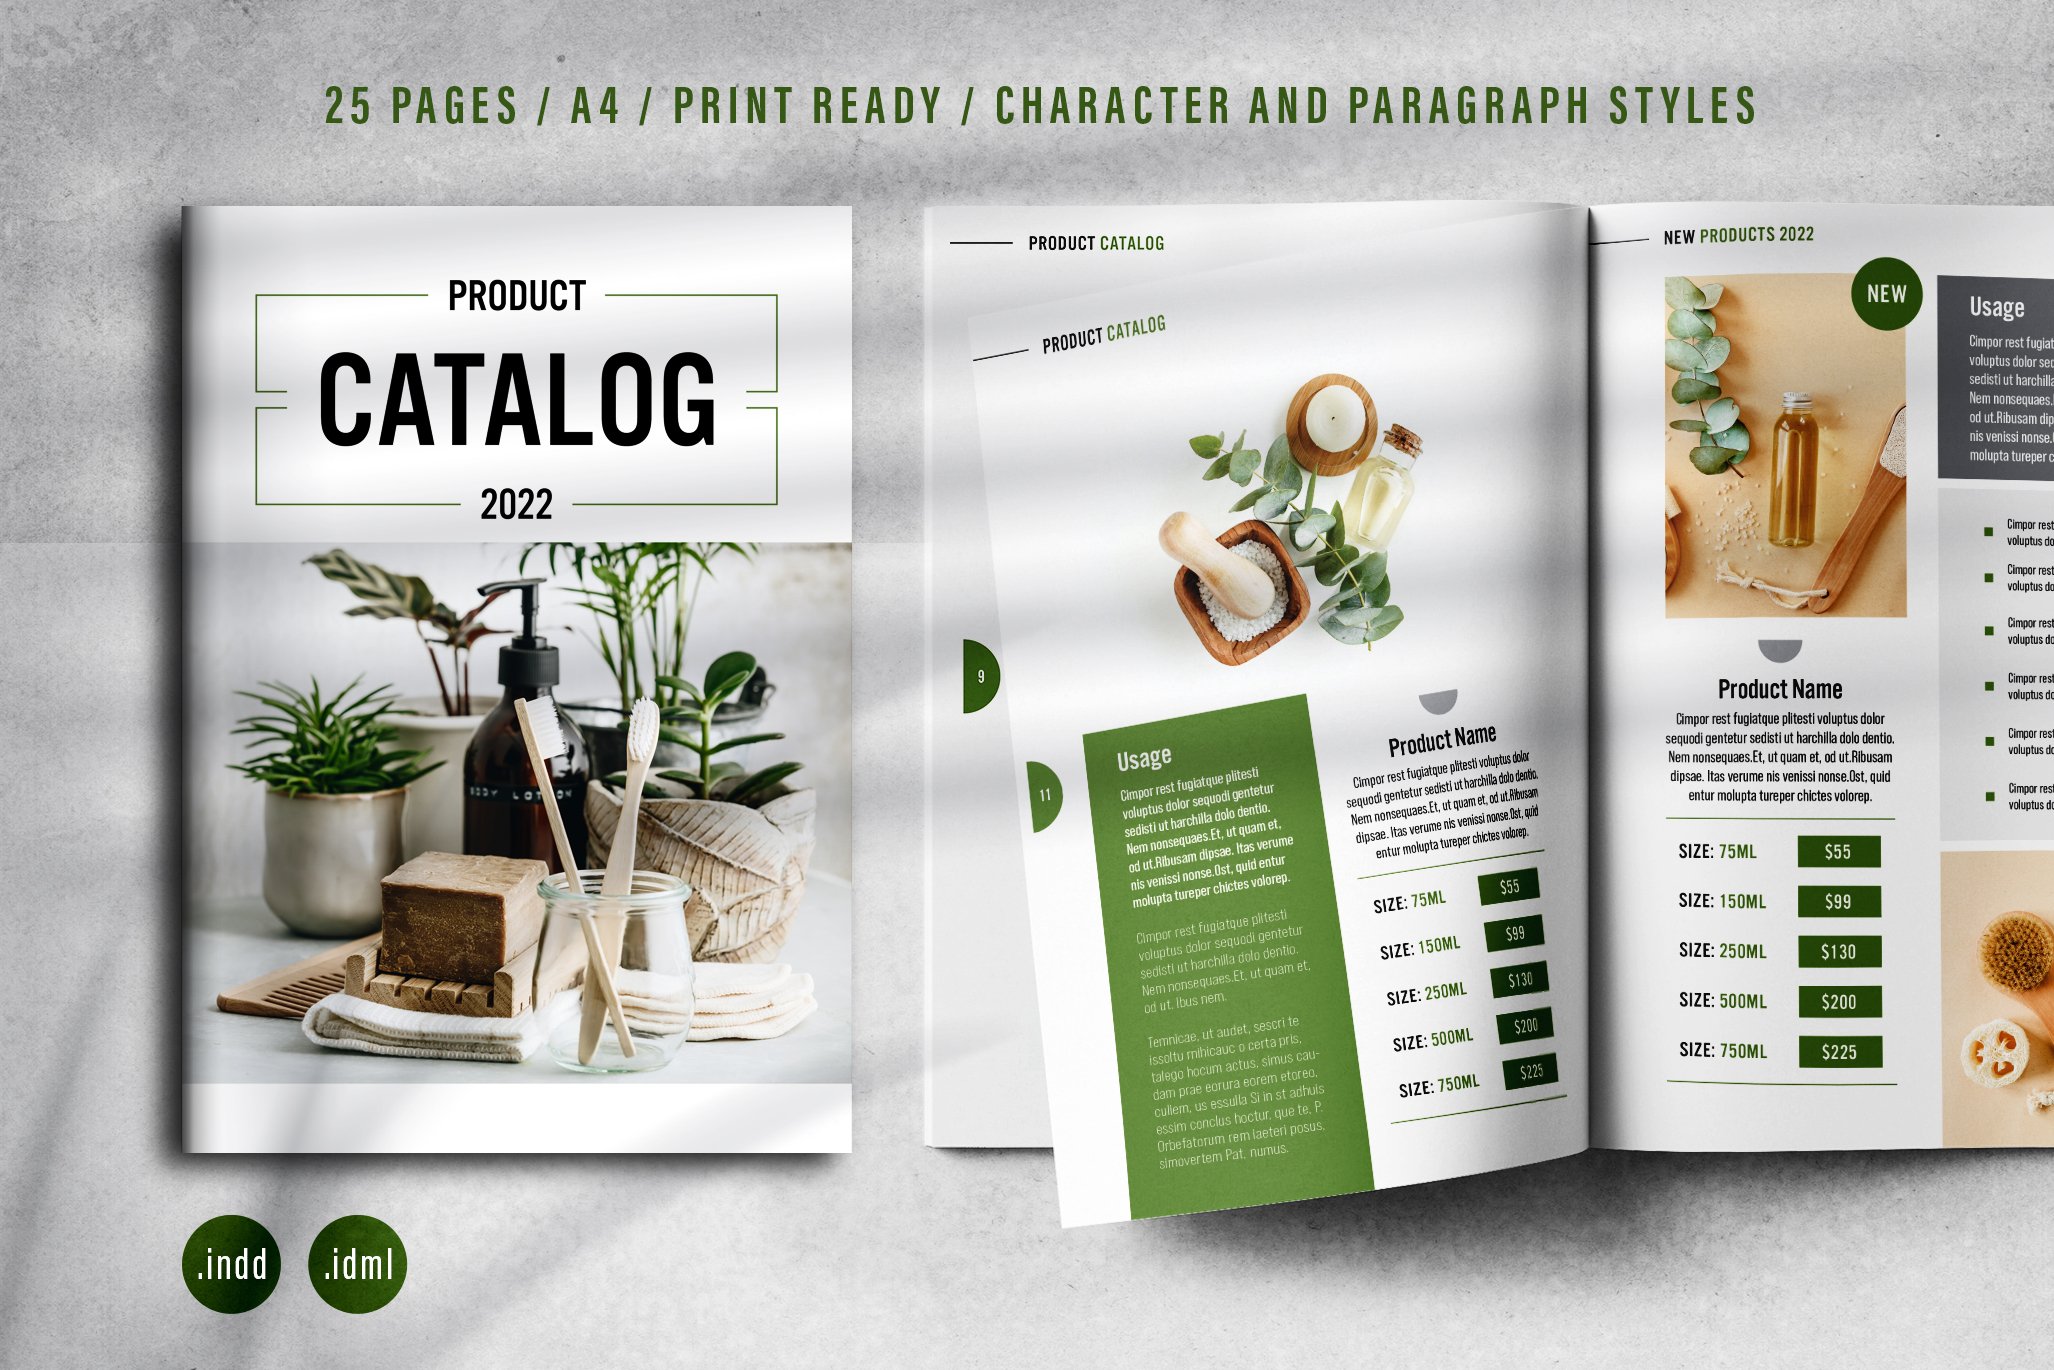 Product Catalog Layout cover image.